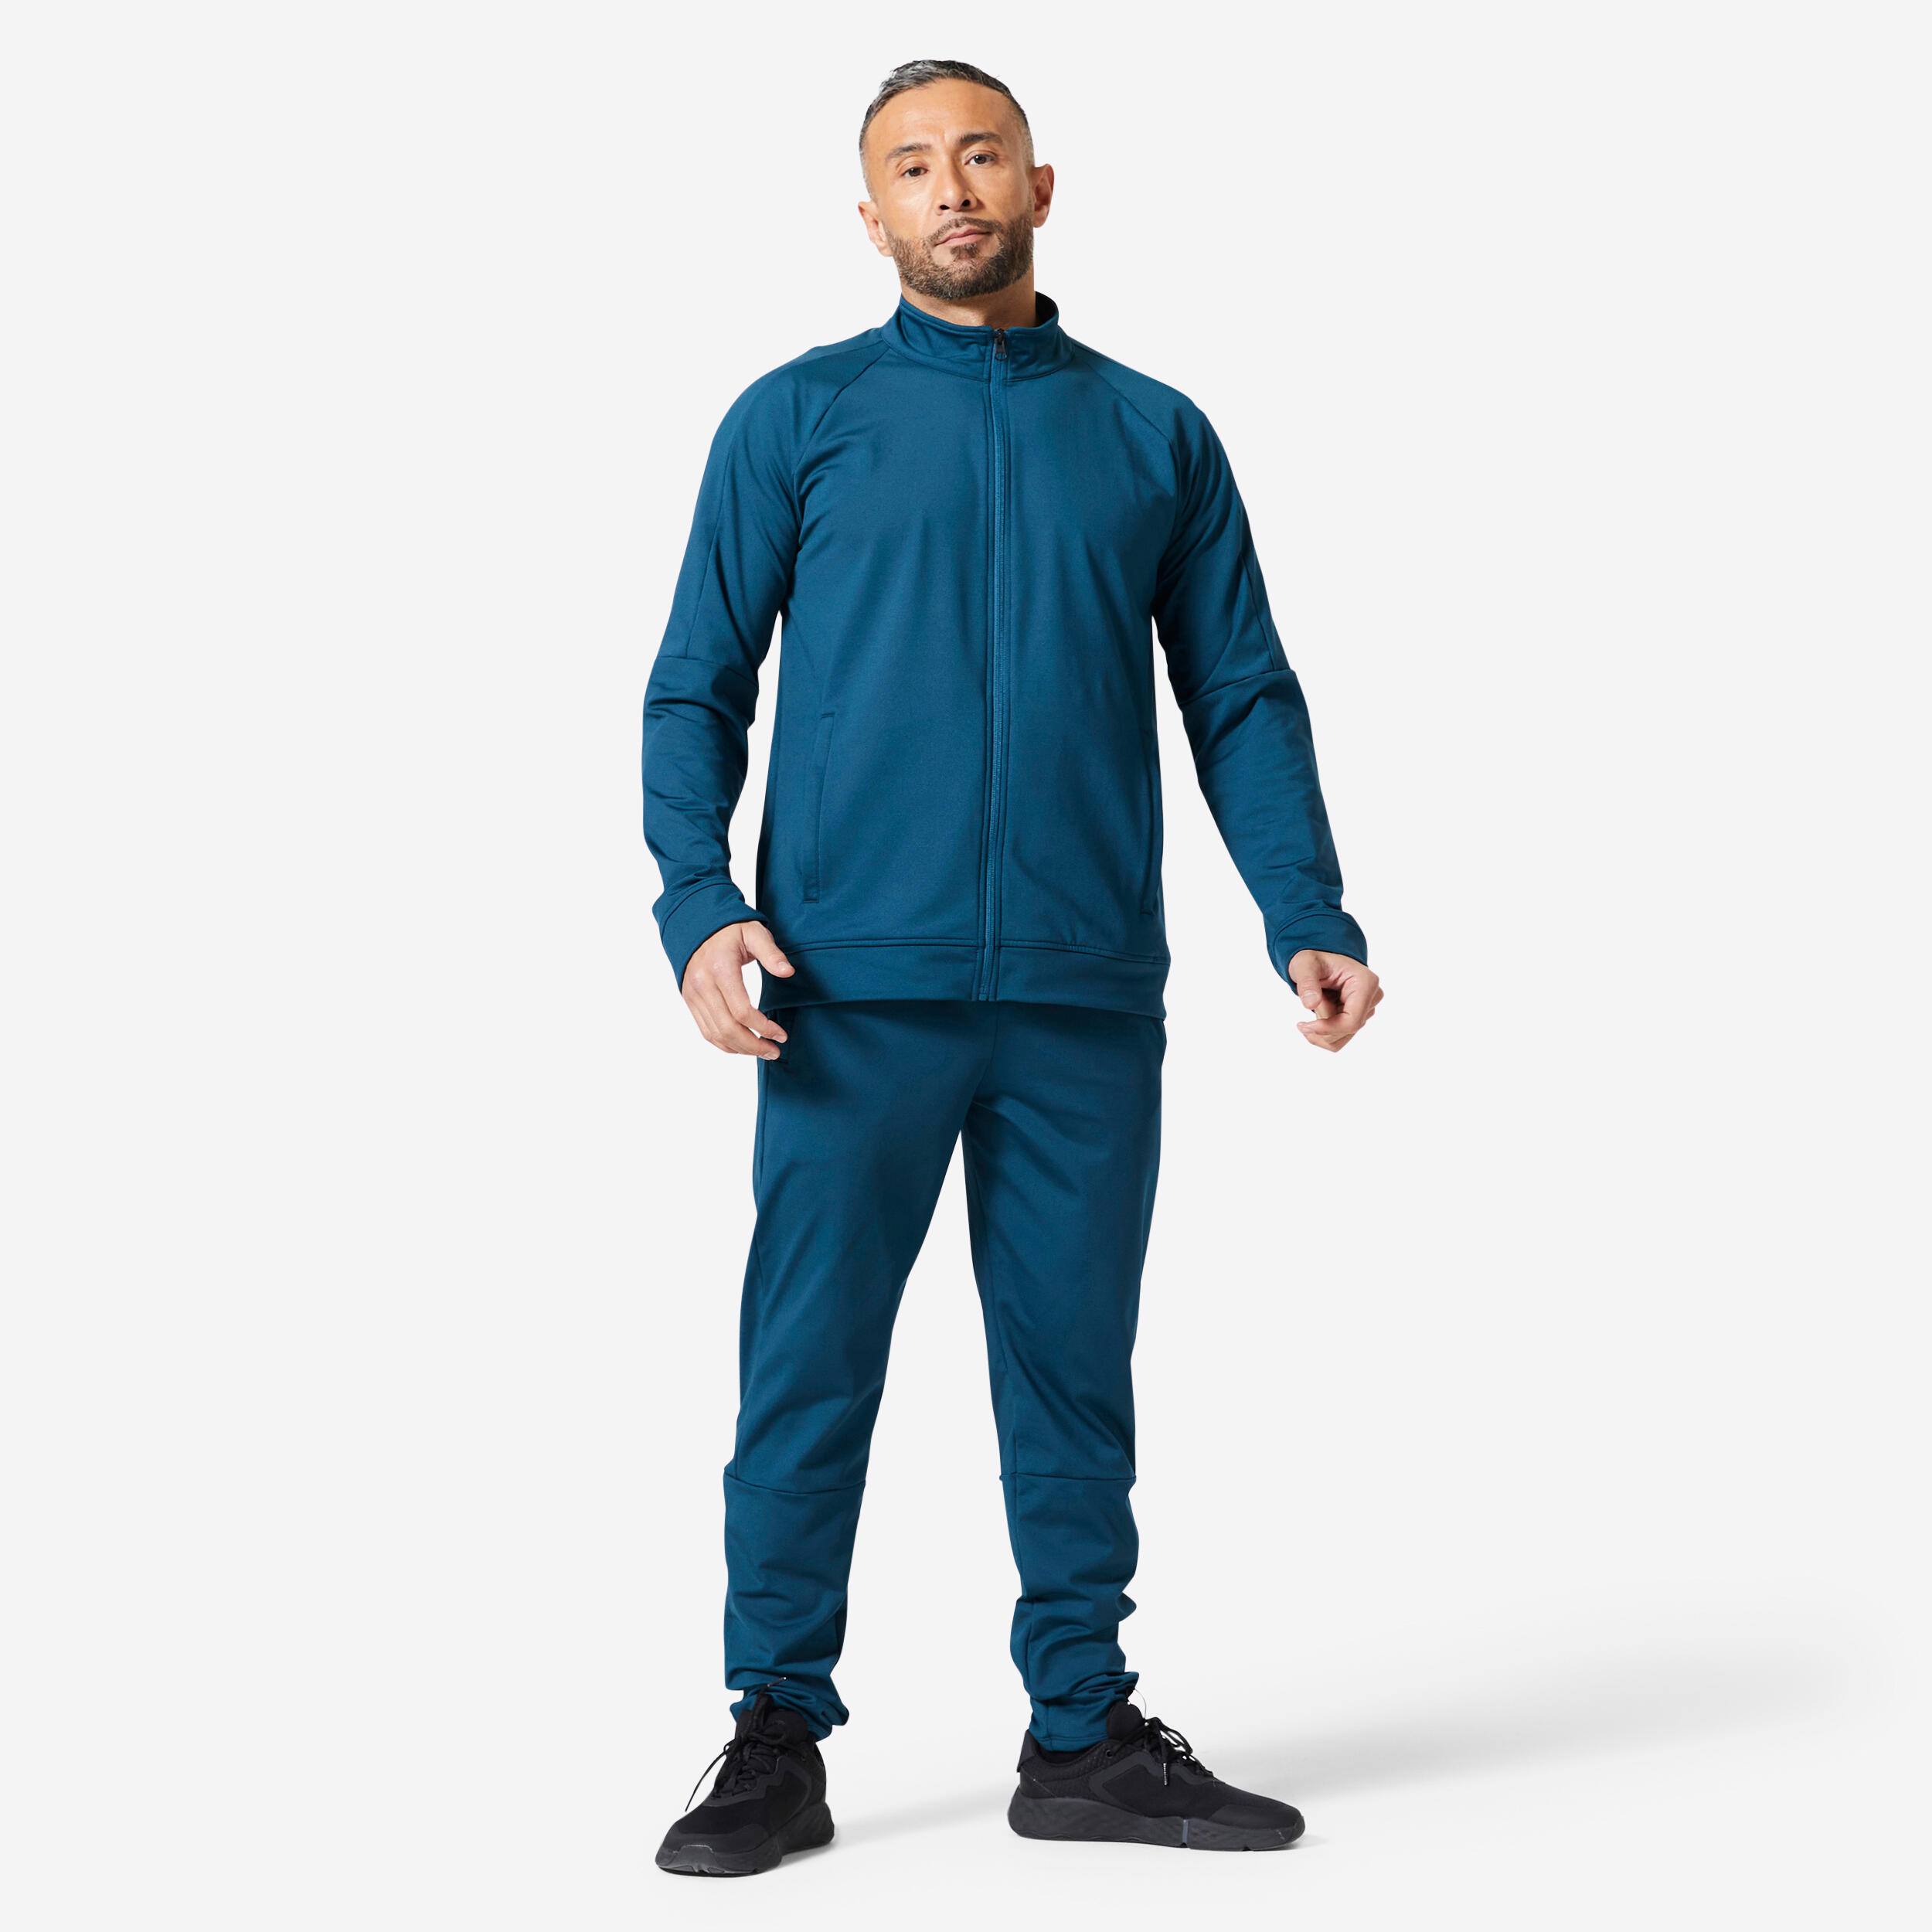 DOMYOS Men's Breathable Slim-Fit Zipped Fitness Tracksuit - Turquoise